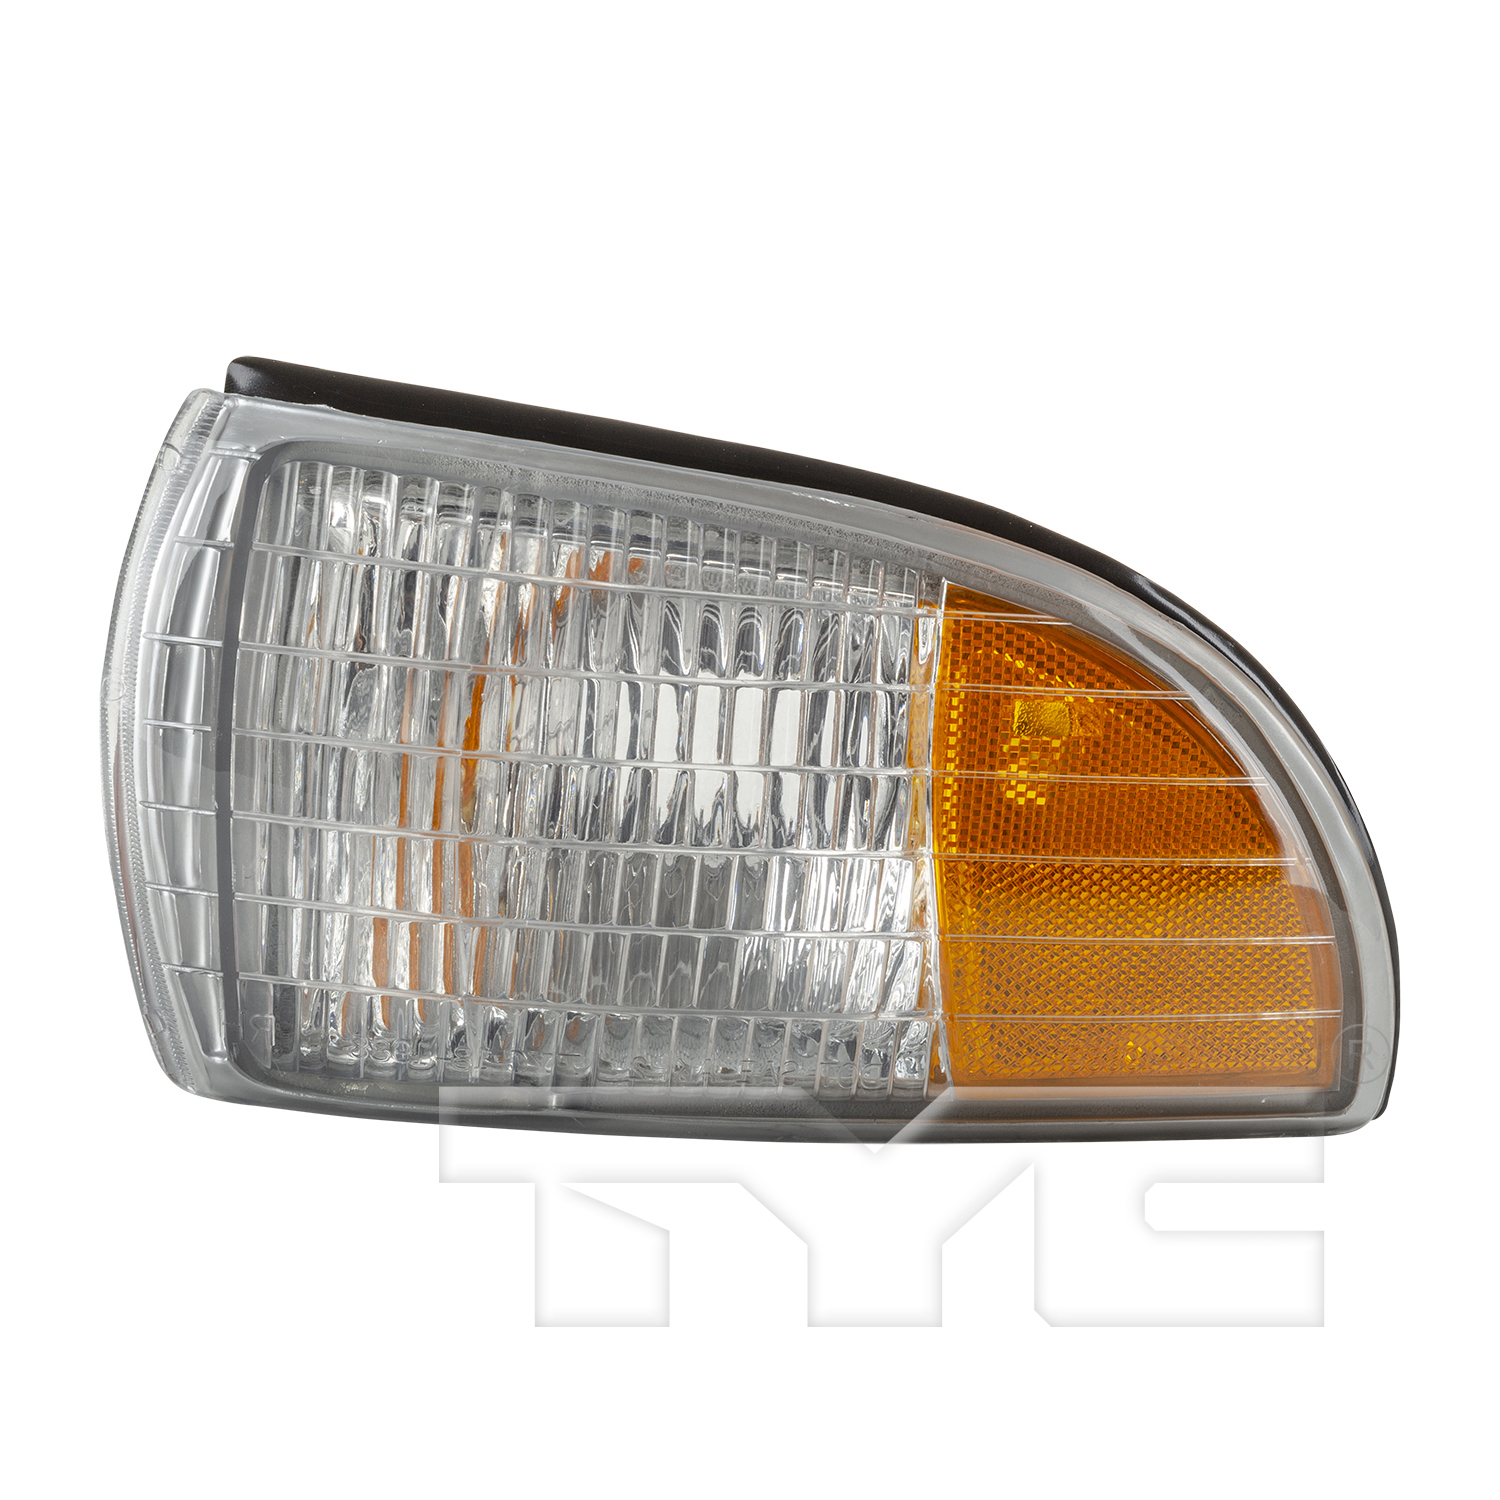 Aftermarket LAMPS for CHEVROLET - CAPRICE, CAPRICE,91-96,LT Front marker lamp assy